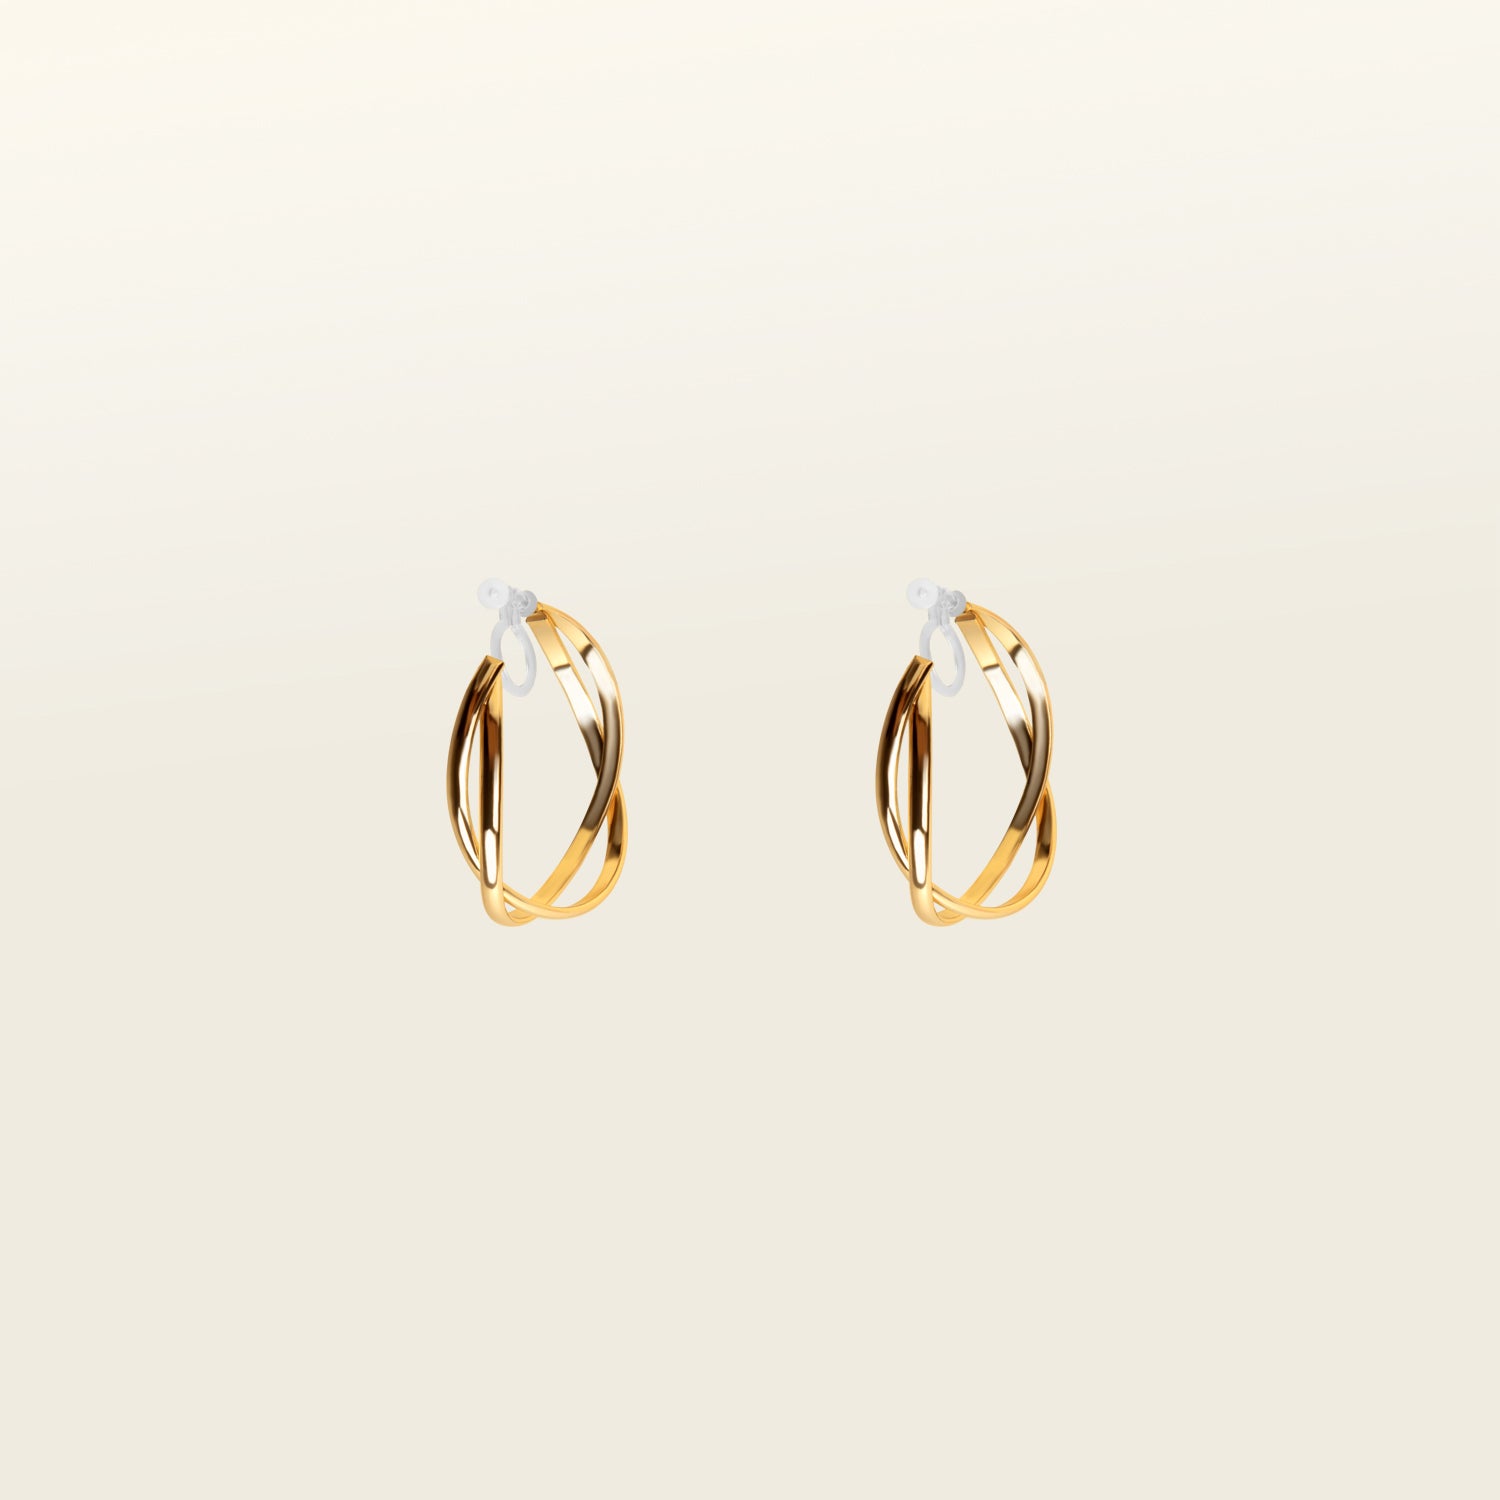 Image of the Gold Vienna Hoop Clip-On Earrings feature a resin clip-on closure with medium secure hold. The earrings are suitable for all types of ears, with an average comfortable wear time of 8-12 hours. No adjustments can be made. Constructed with gold tone metal alloy, these earrings are also available in silver.